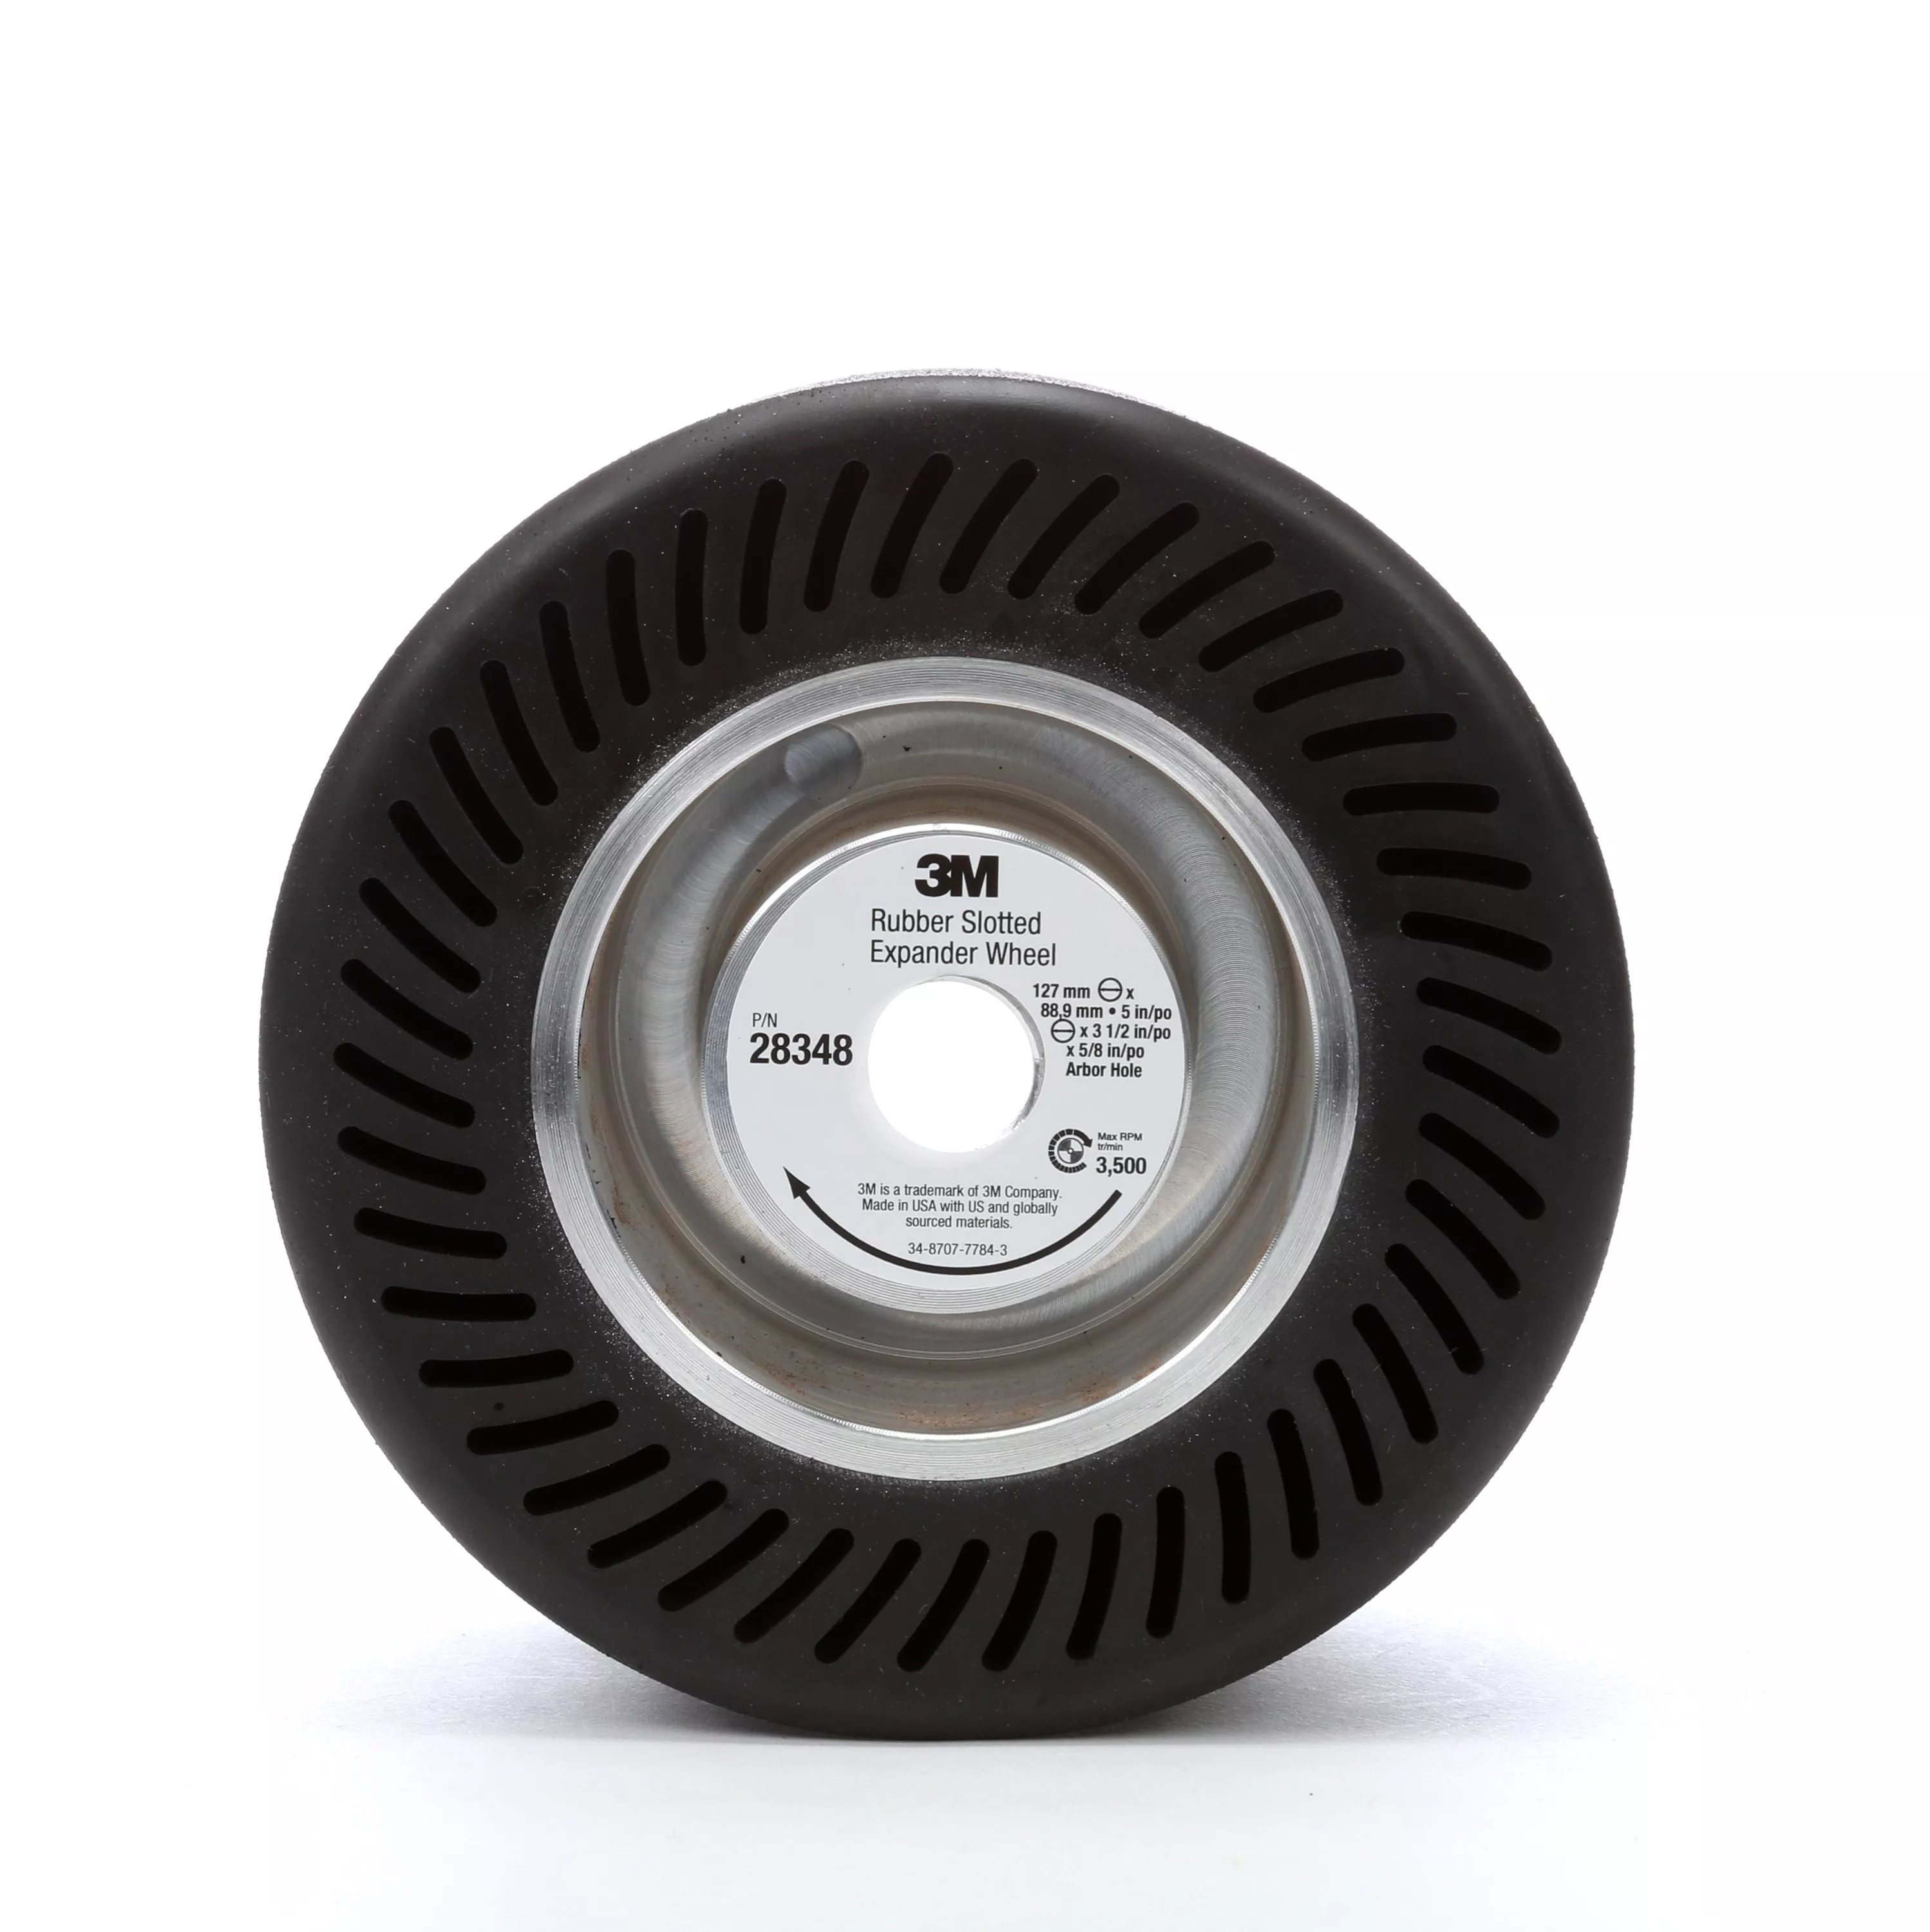 Product Number 28348 | 3M™ Rubber Slotted Expander Wheel 28348